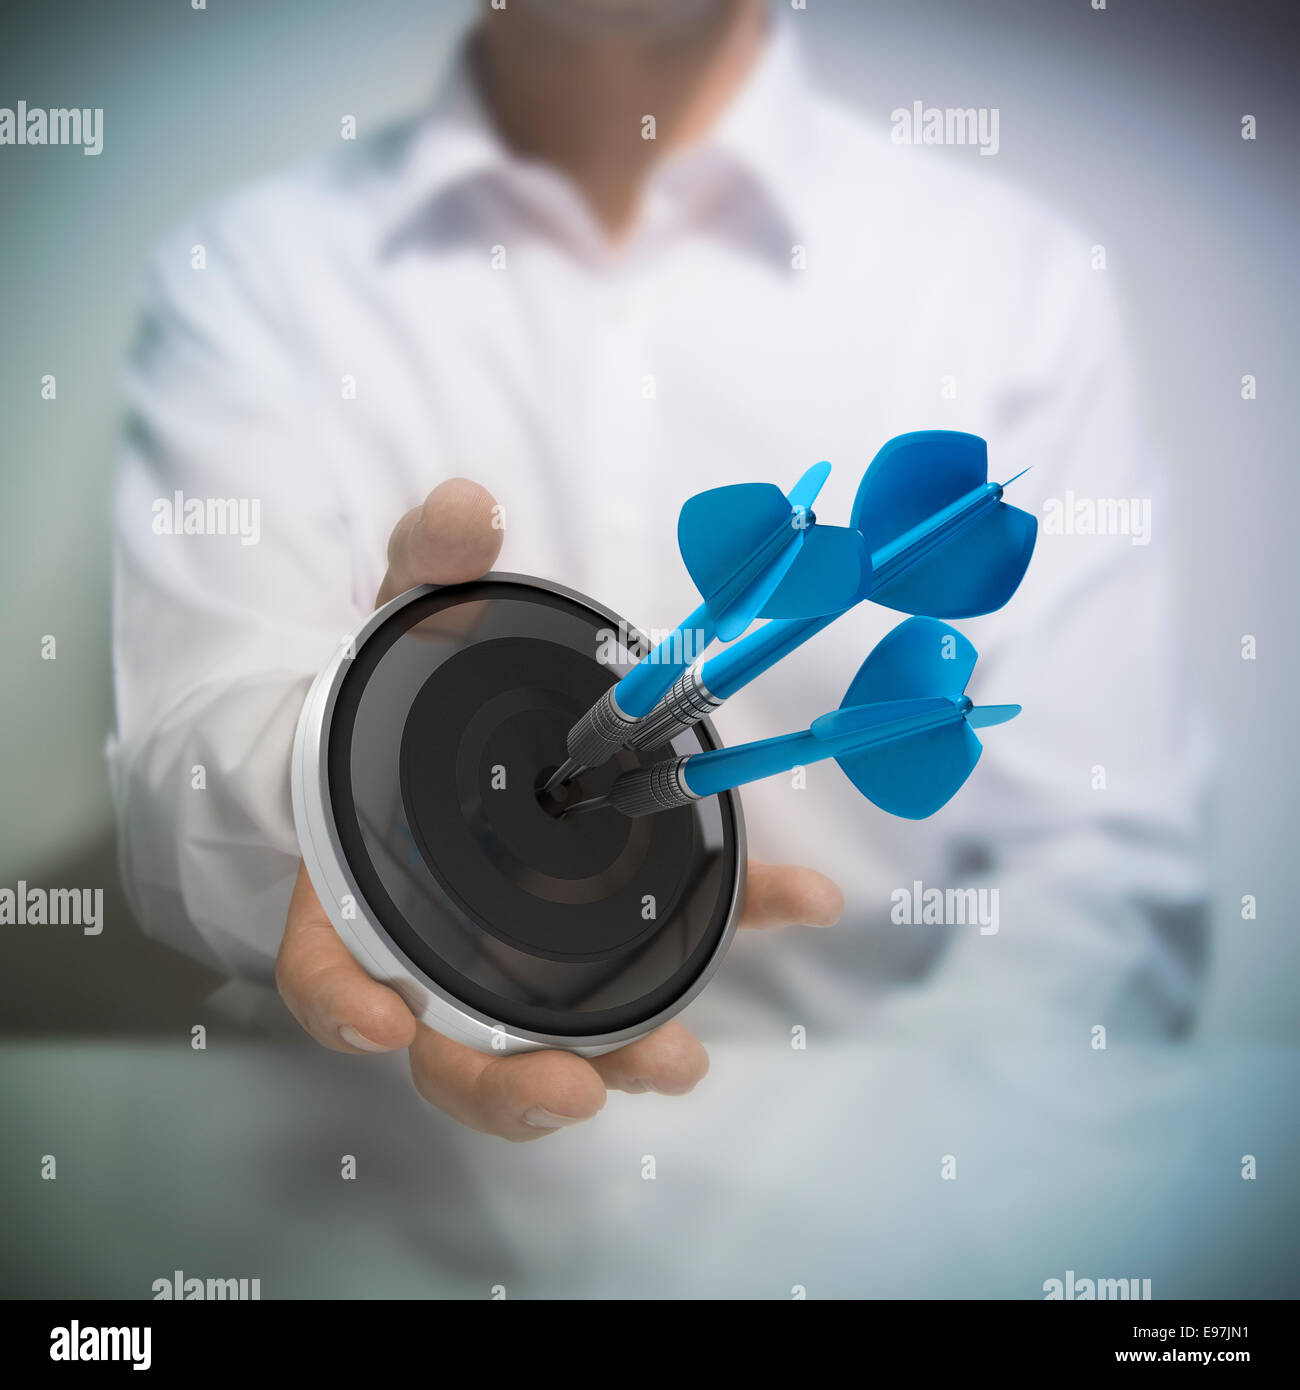 Man holding on black target with three blue darts hitting the center. Concept image for illustration of Marketing and advertisin Stock Photo